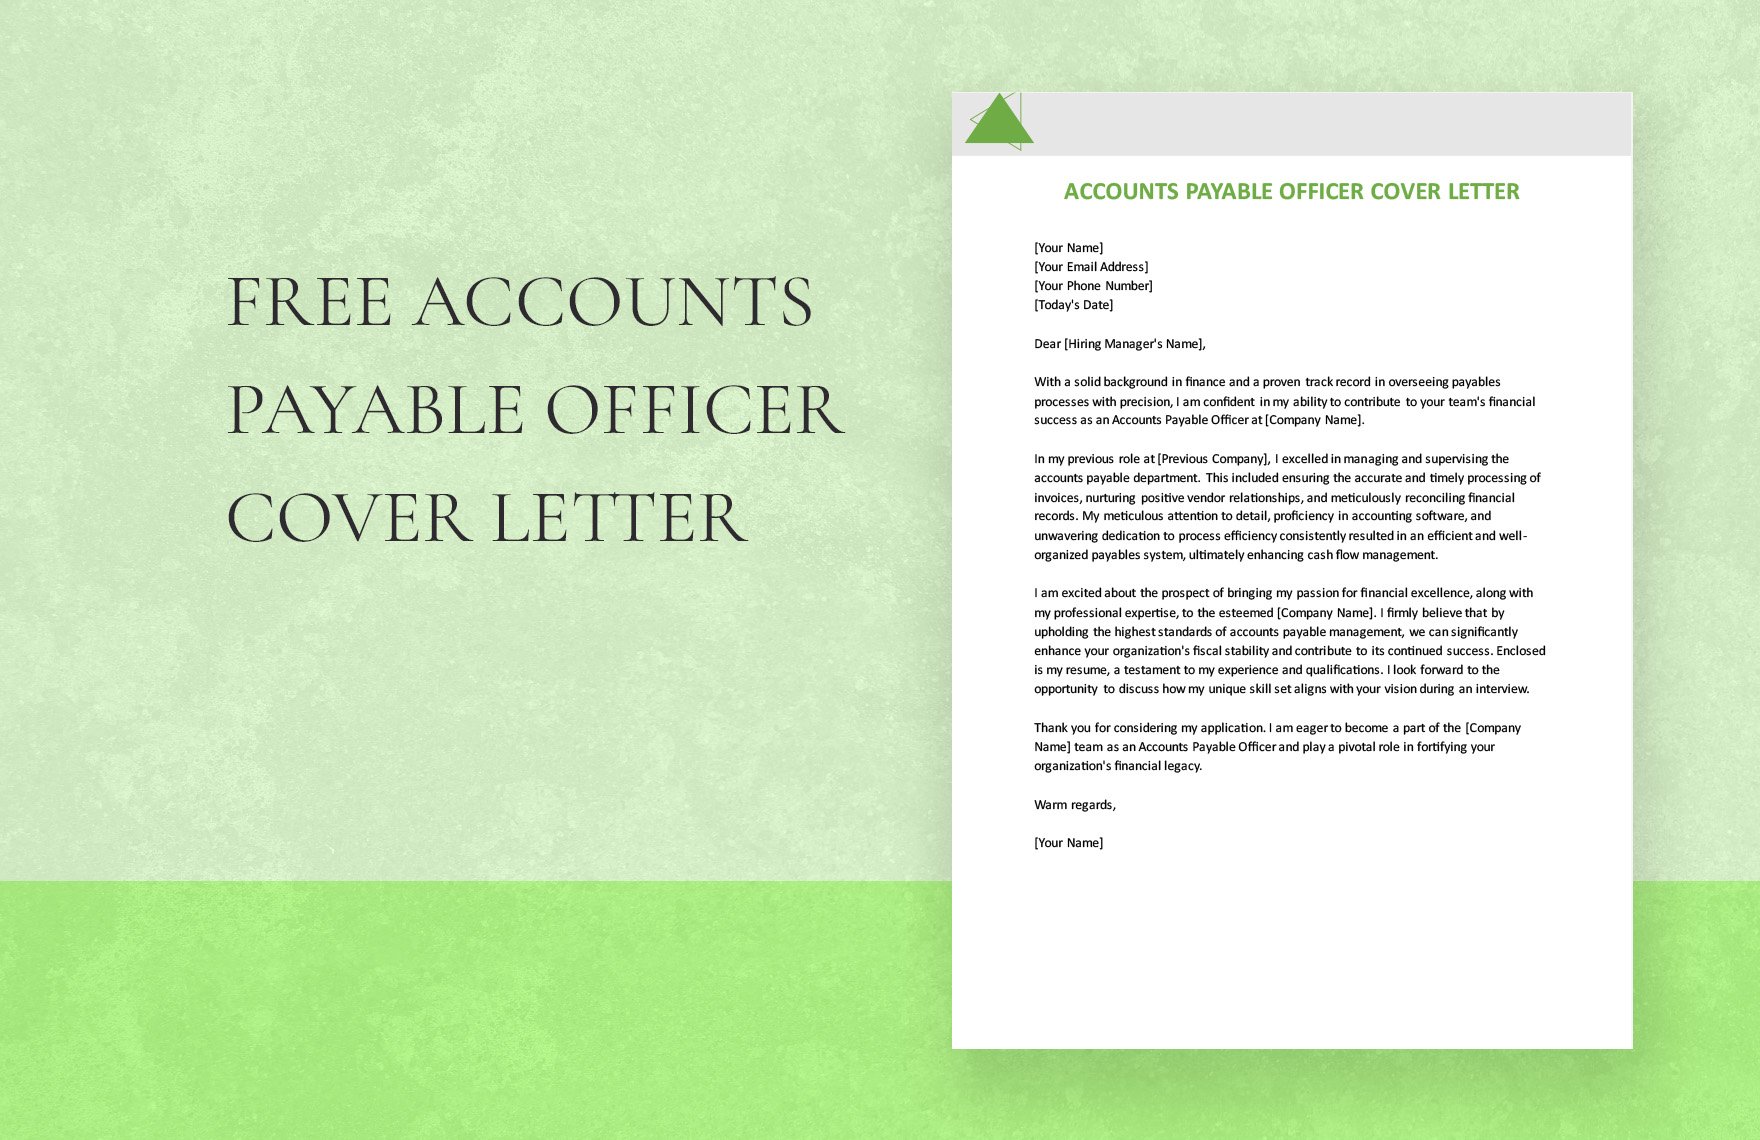 Accounts Payable Officer Cover Letter in Word, Google Docs, PDF